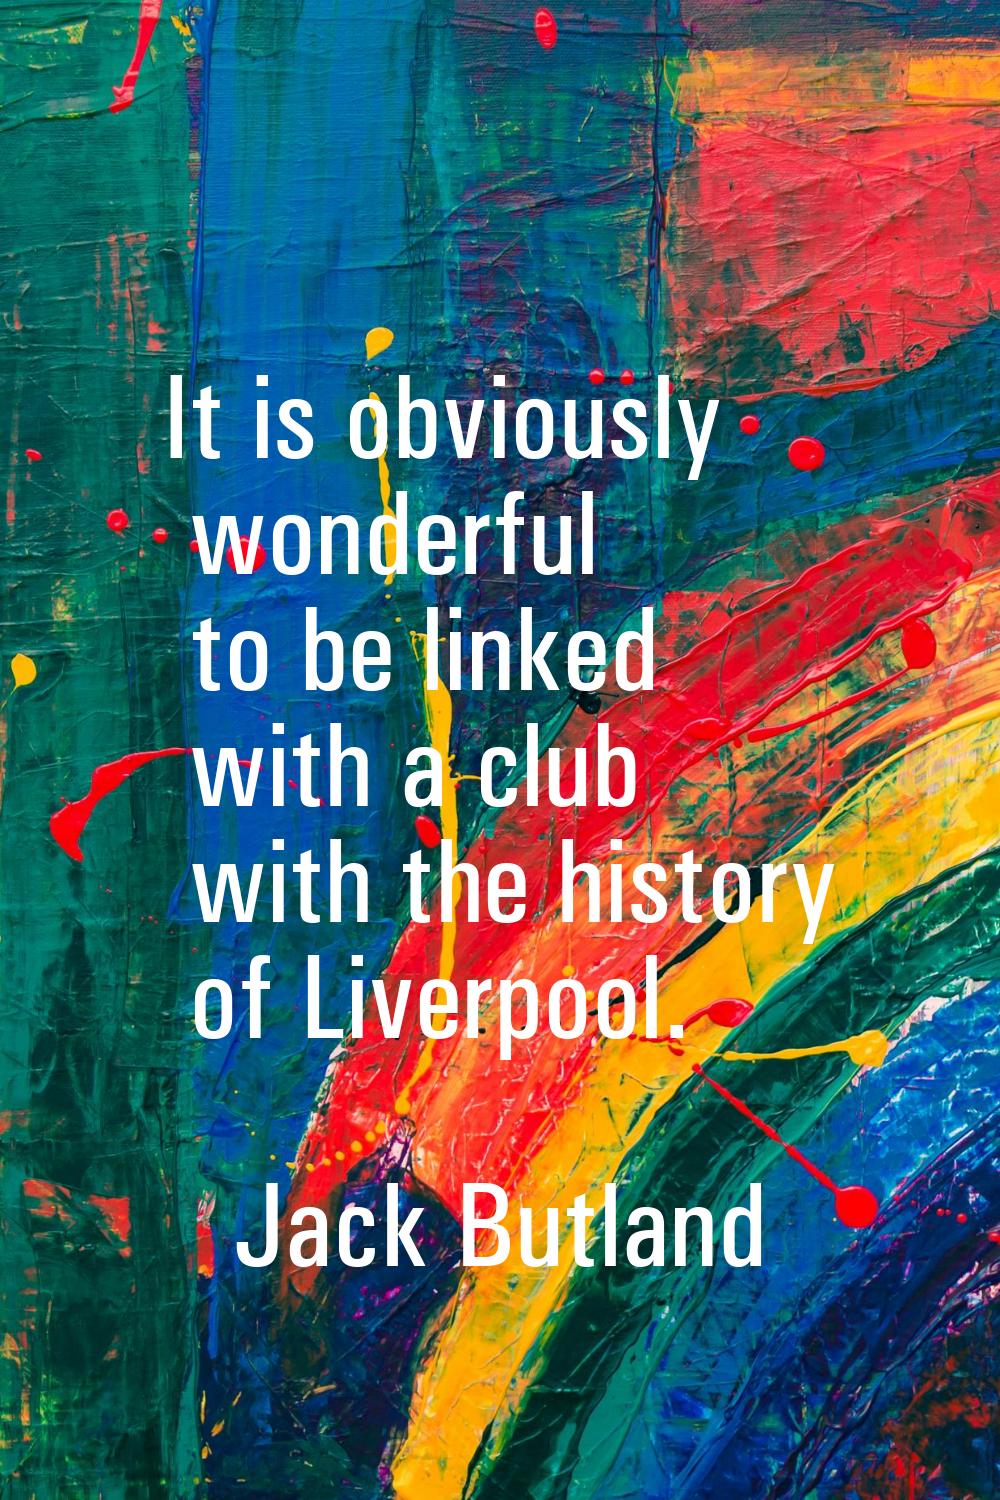 It is obviously wonderful to be linked with a club with the history of Liverpool.